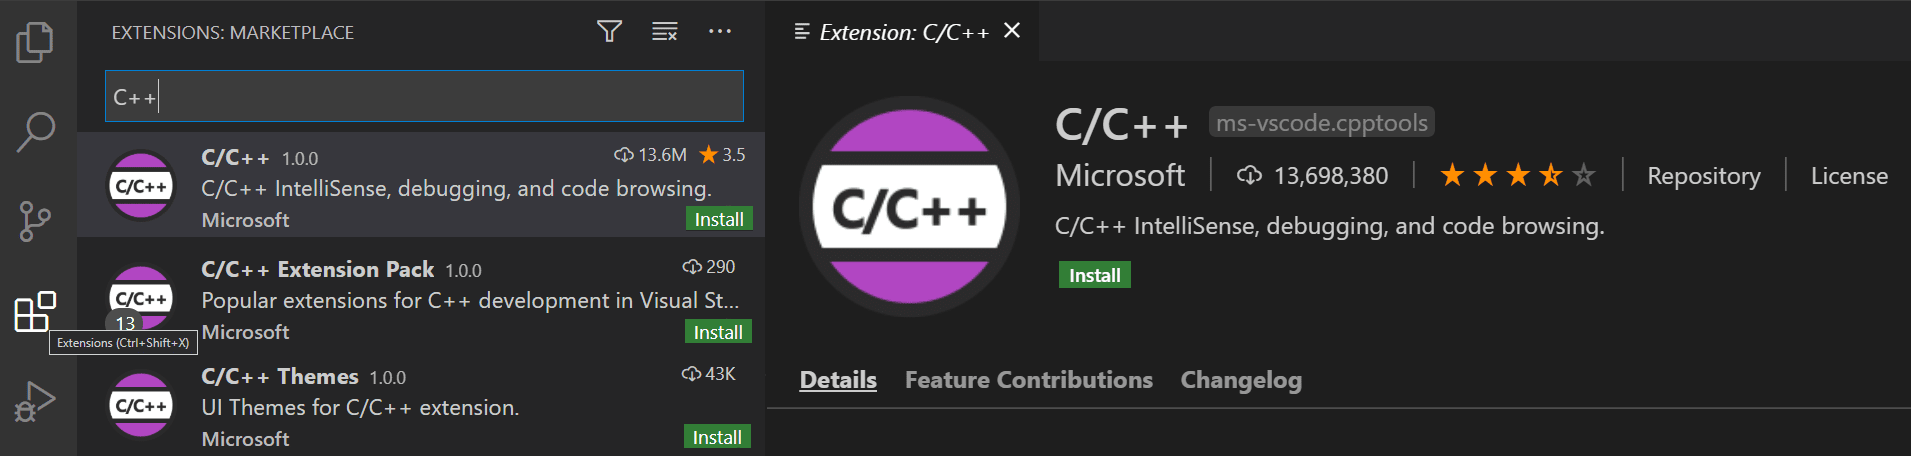 Search for c++ in the Extensions view